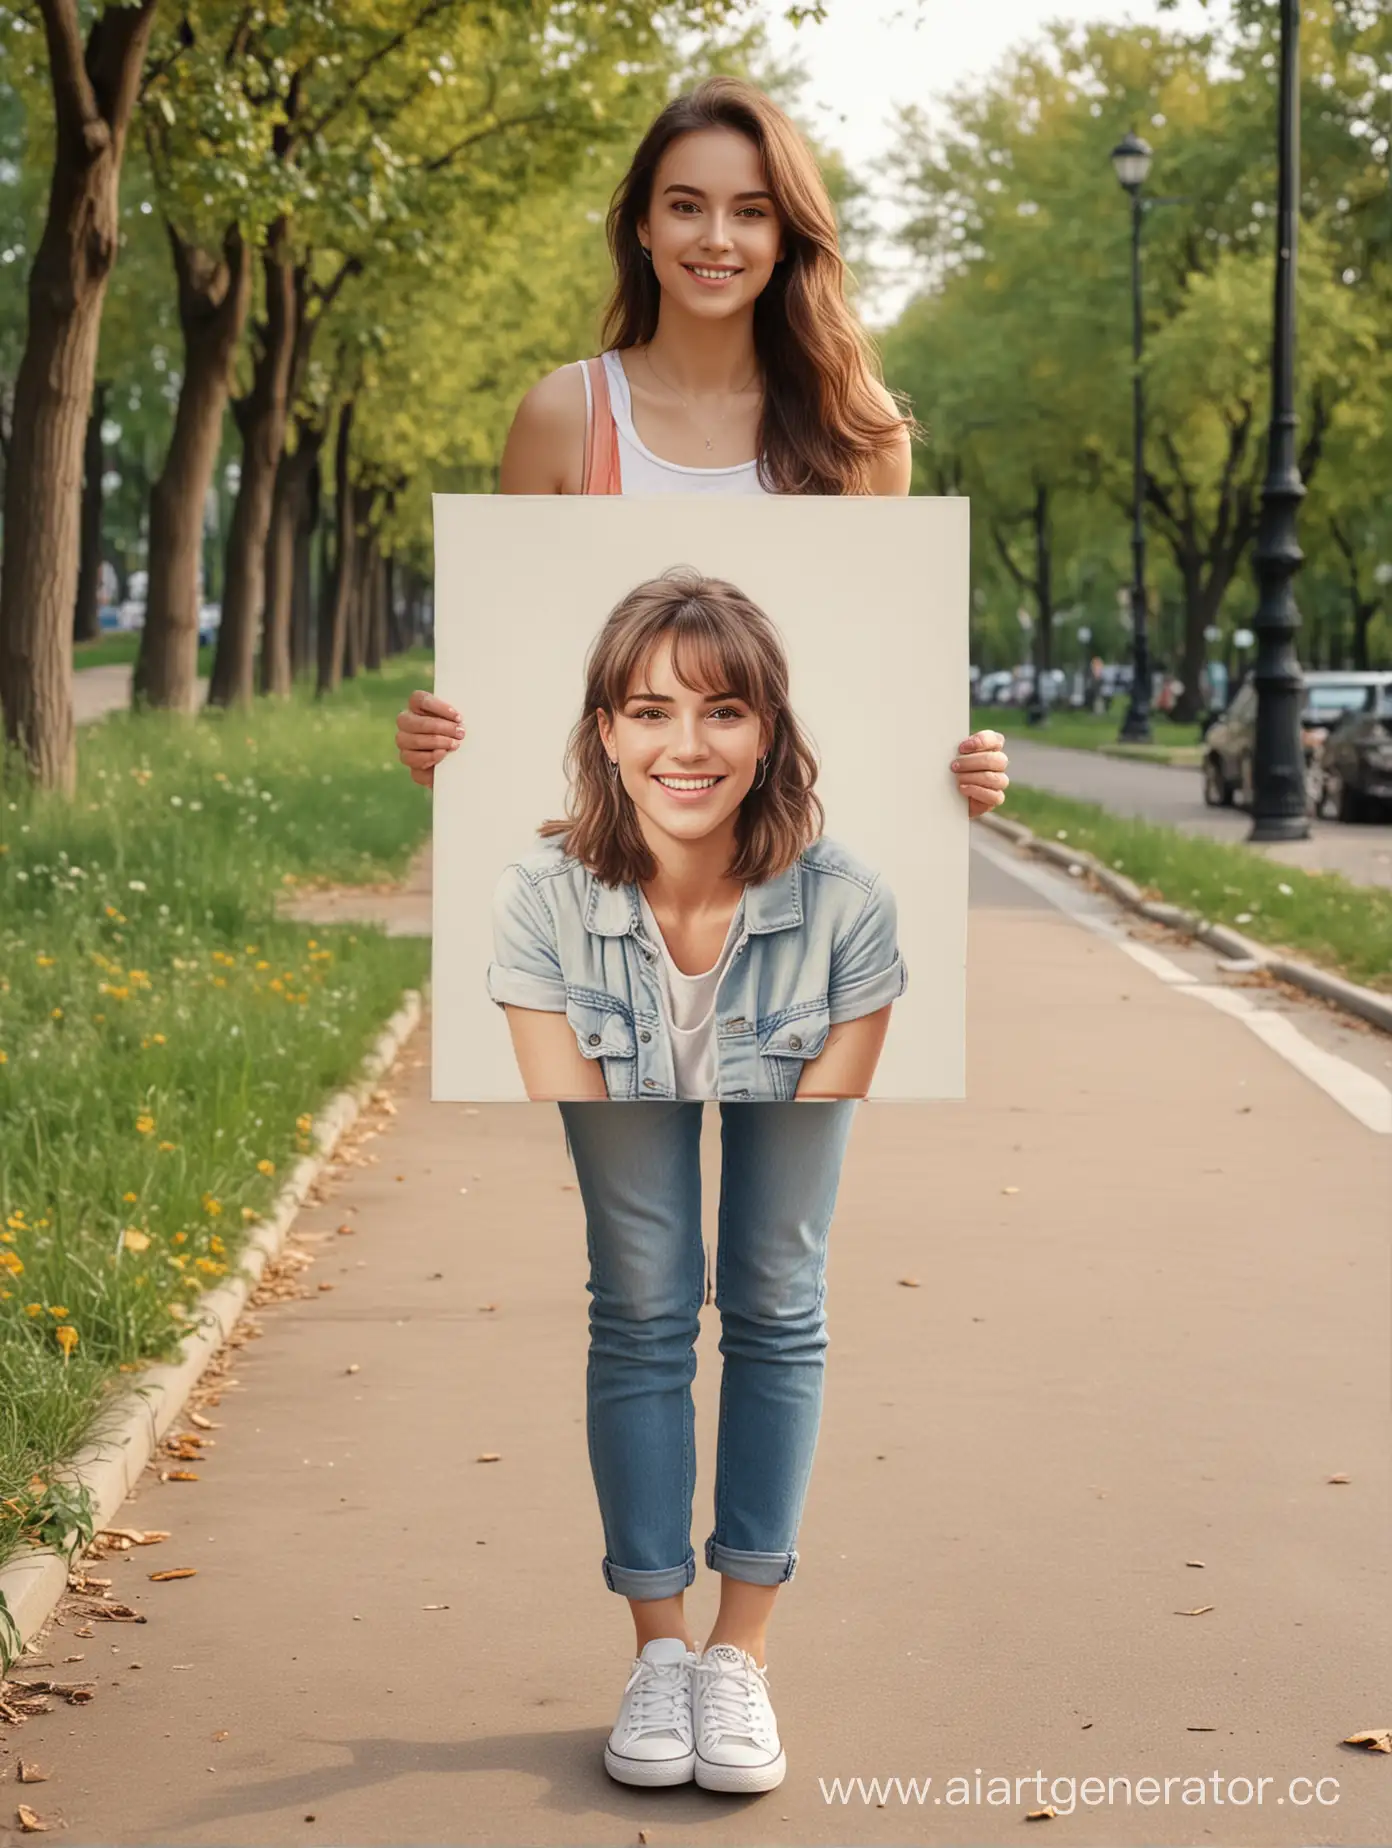 Happy-Young-Woman-in-Sneakers-Holding-Canvas-Portrait-Outdoors